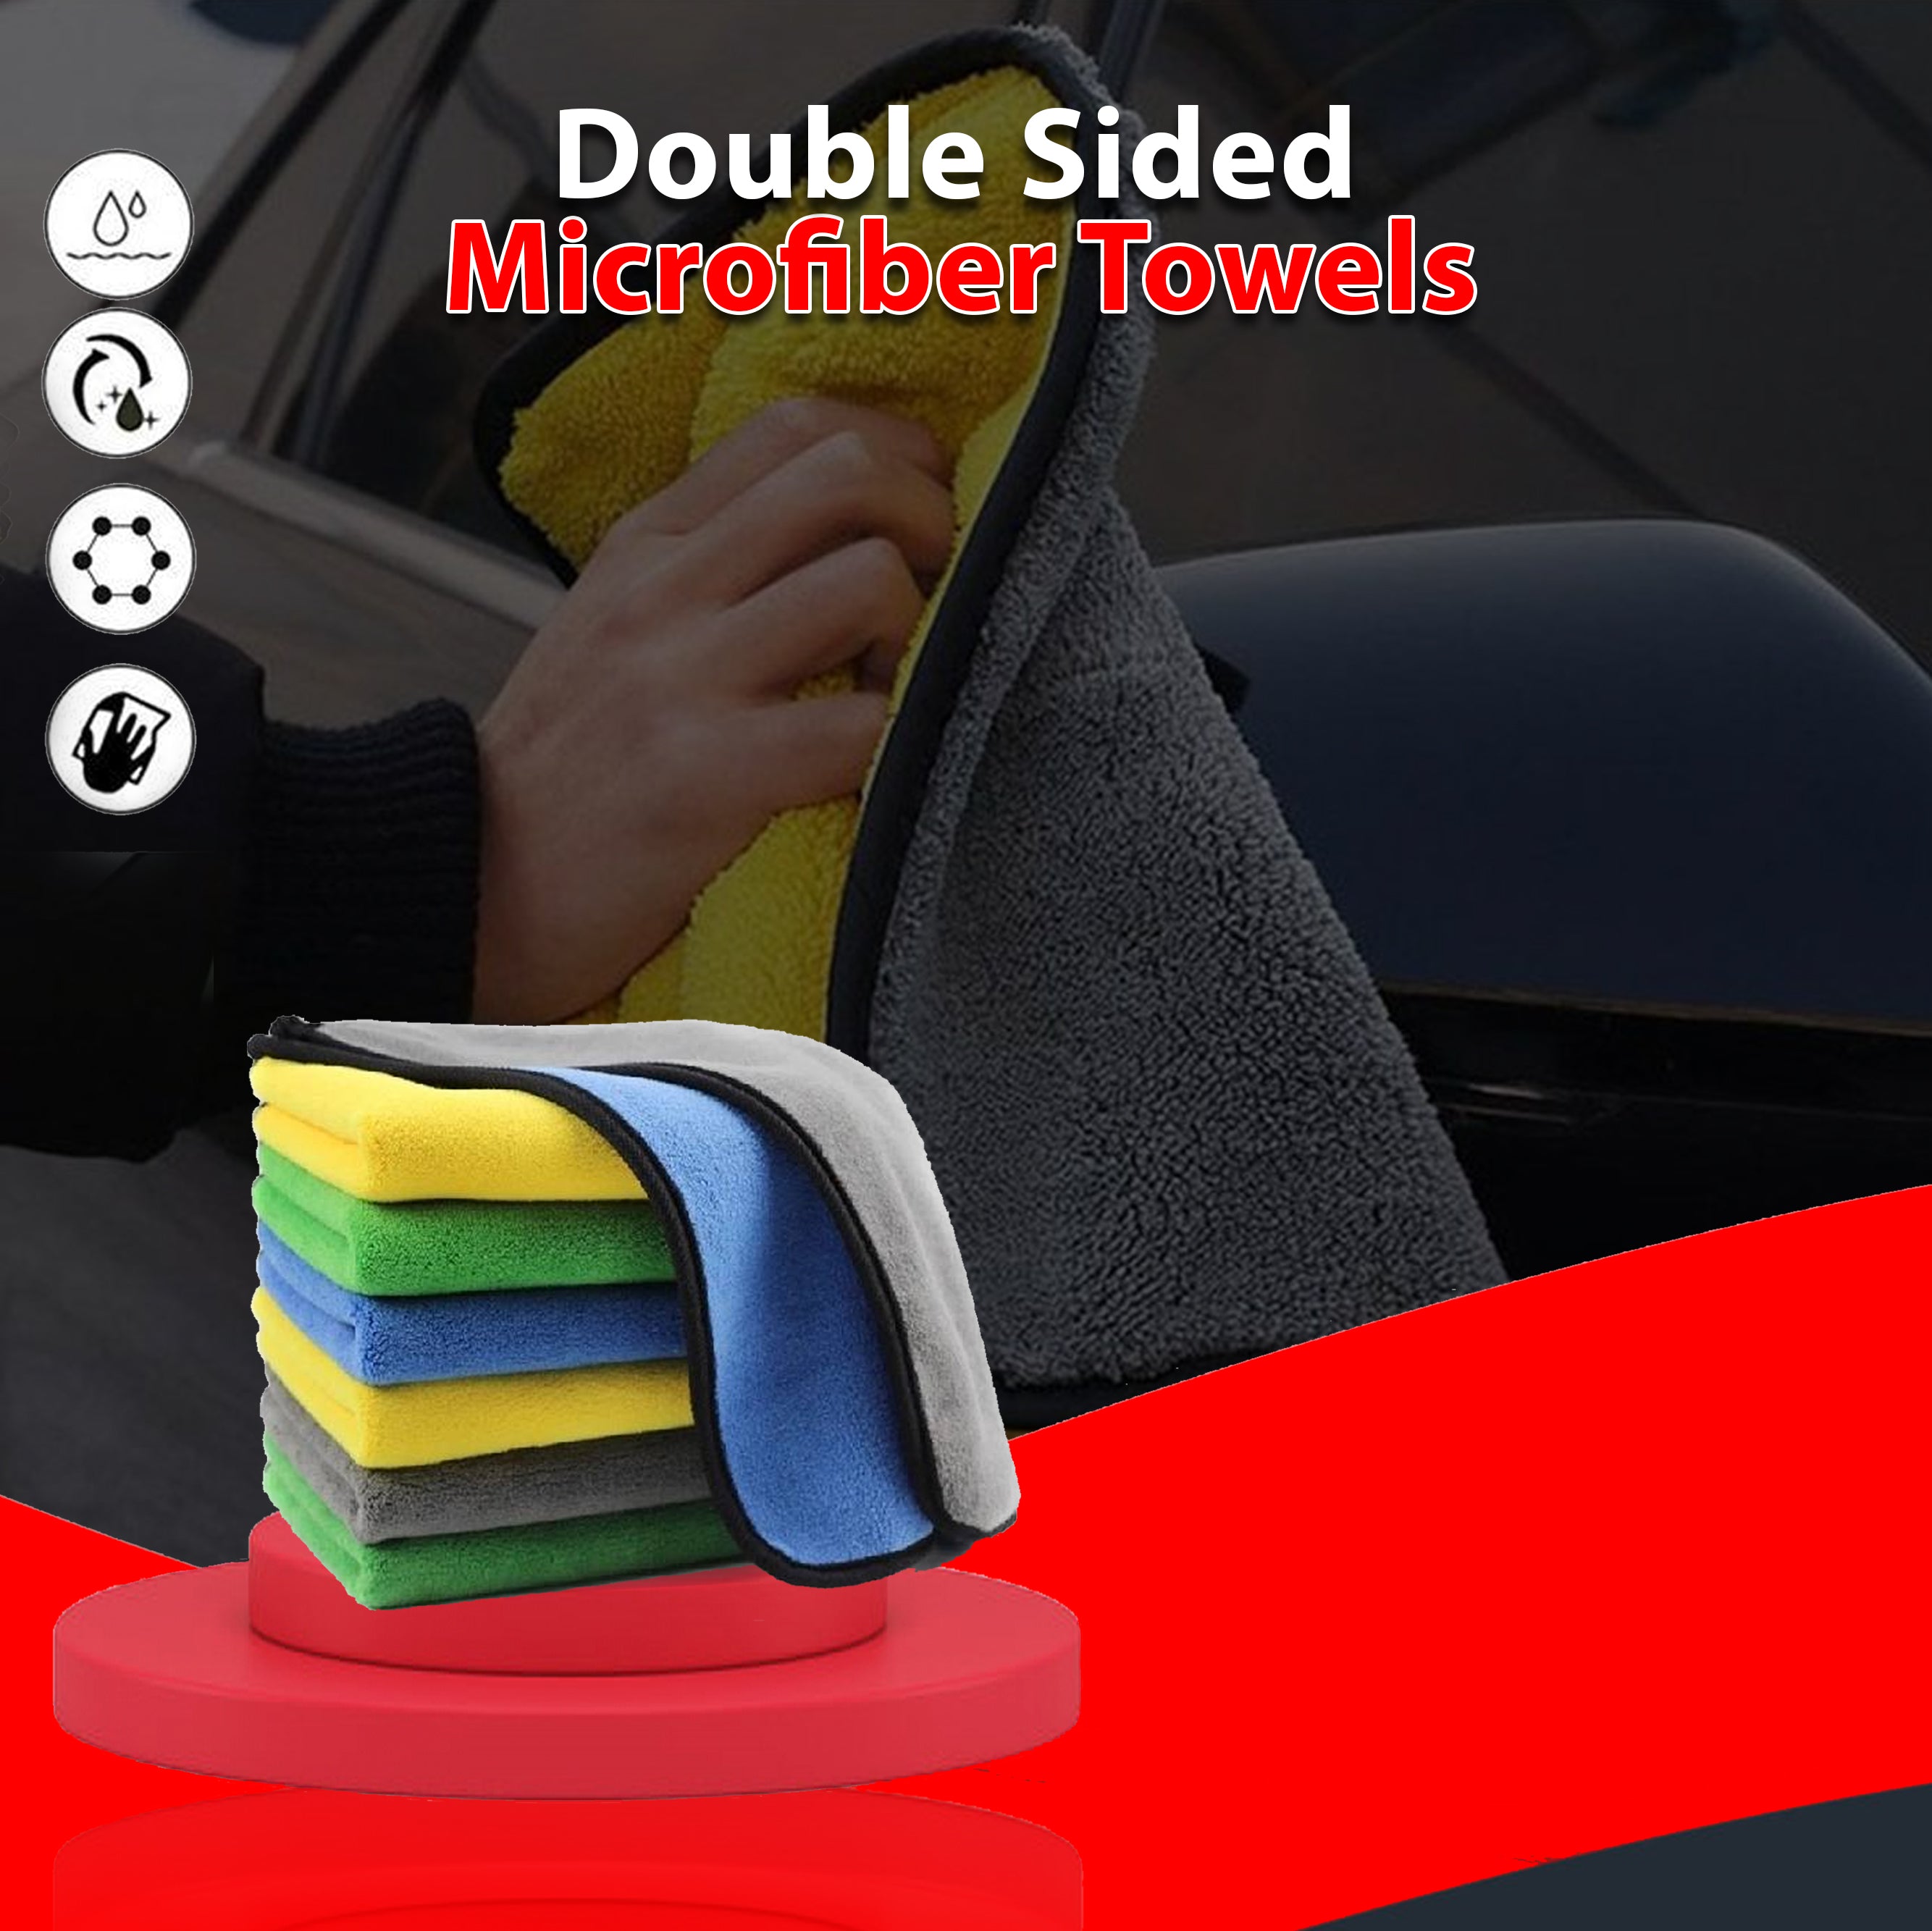 Double Sided Microfiber Towel